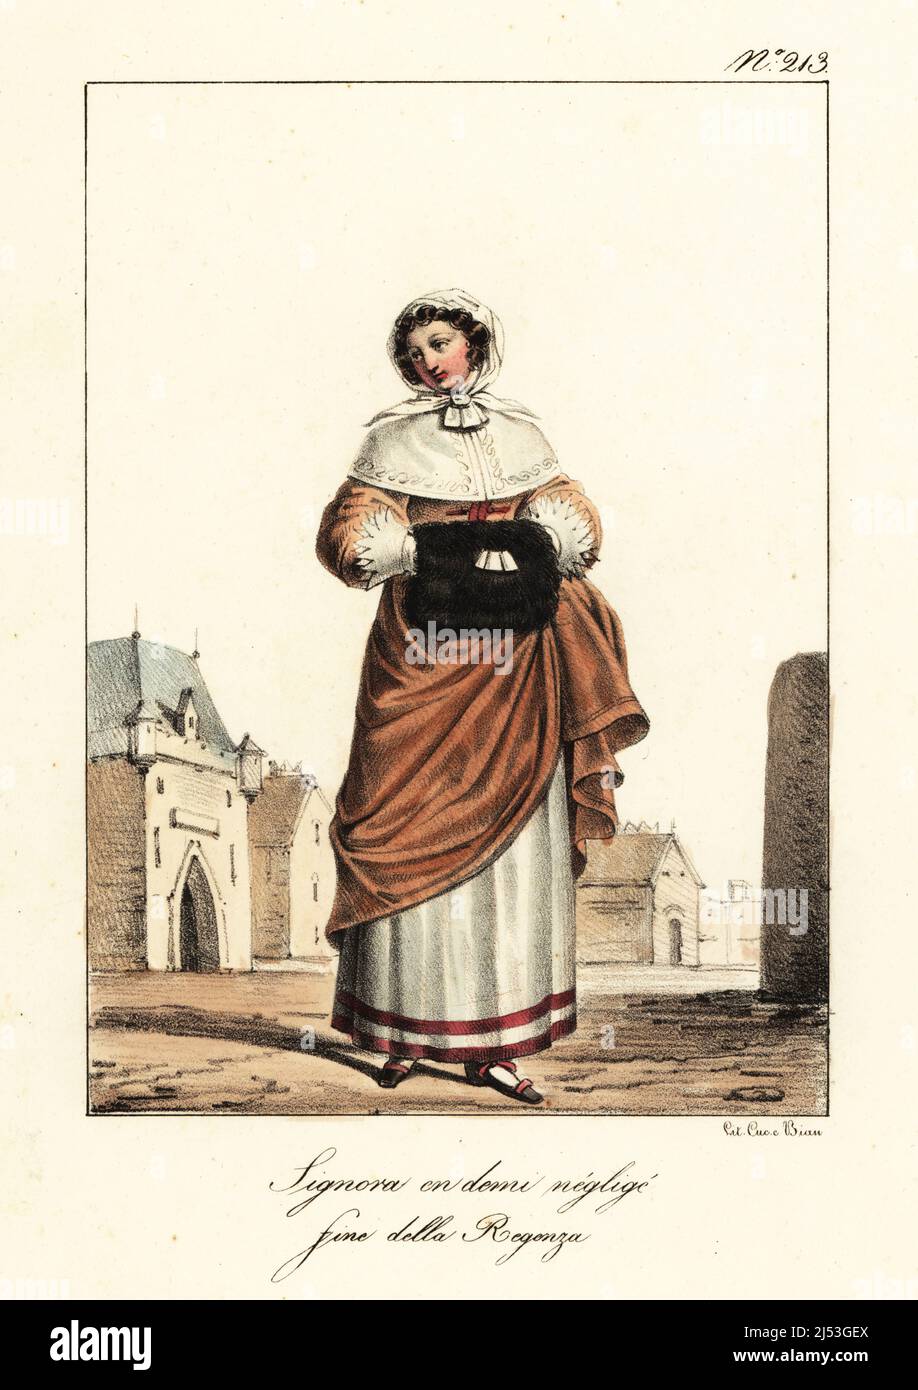 Young woman in morning dress, France, end of Regency, 1720s. In bonnet,  capelet, gown with full sleeves, underskirt, with fur muff. Jeune Dame en  demi Neglige, fin de la Regence. Handcoloured lithograph